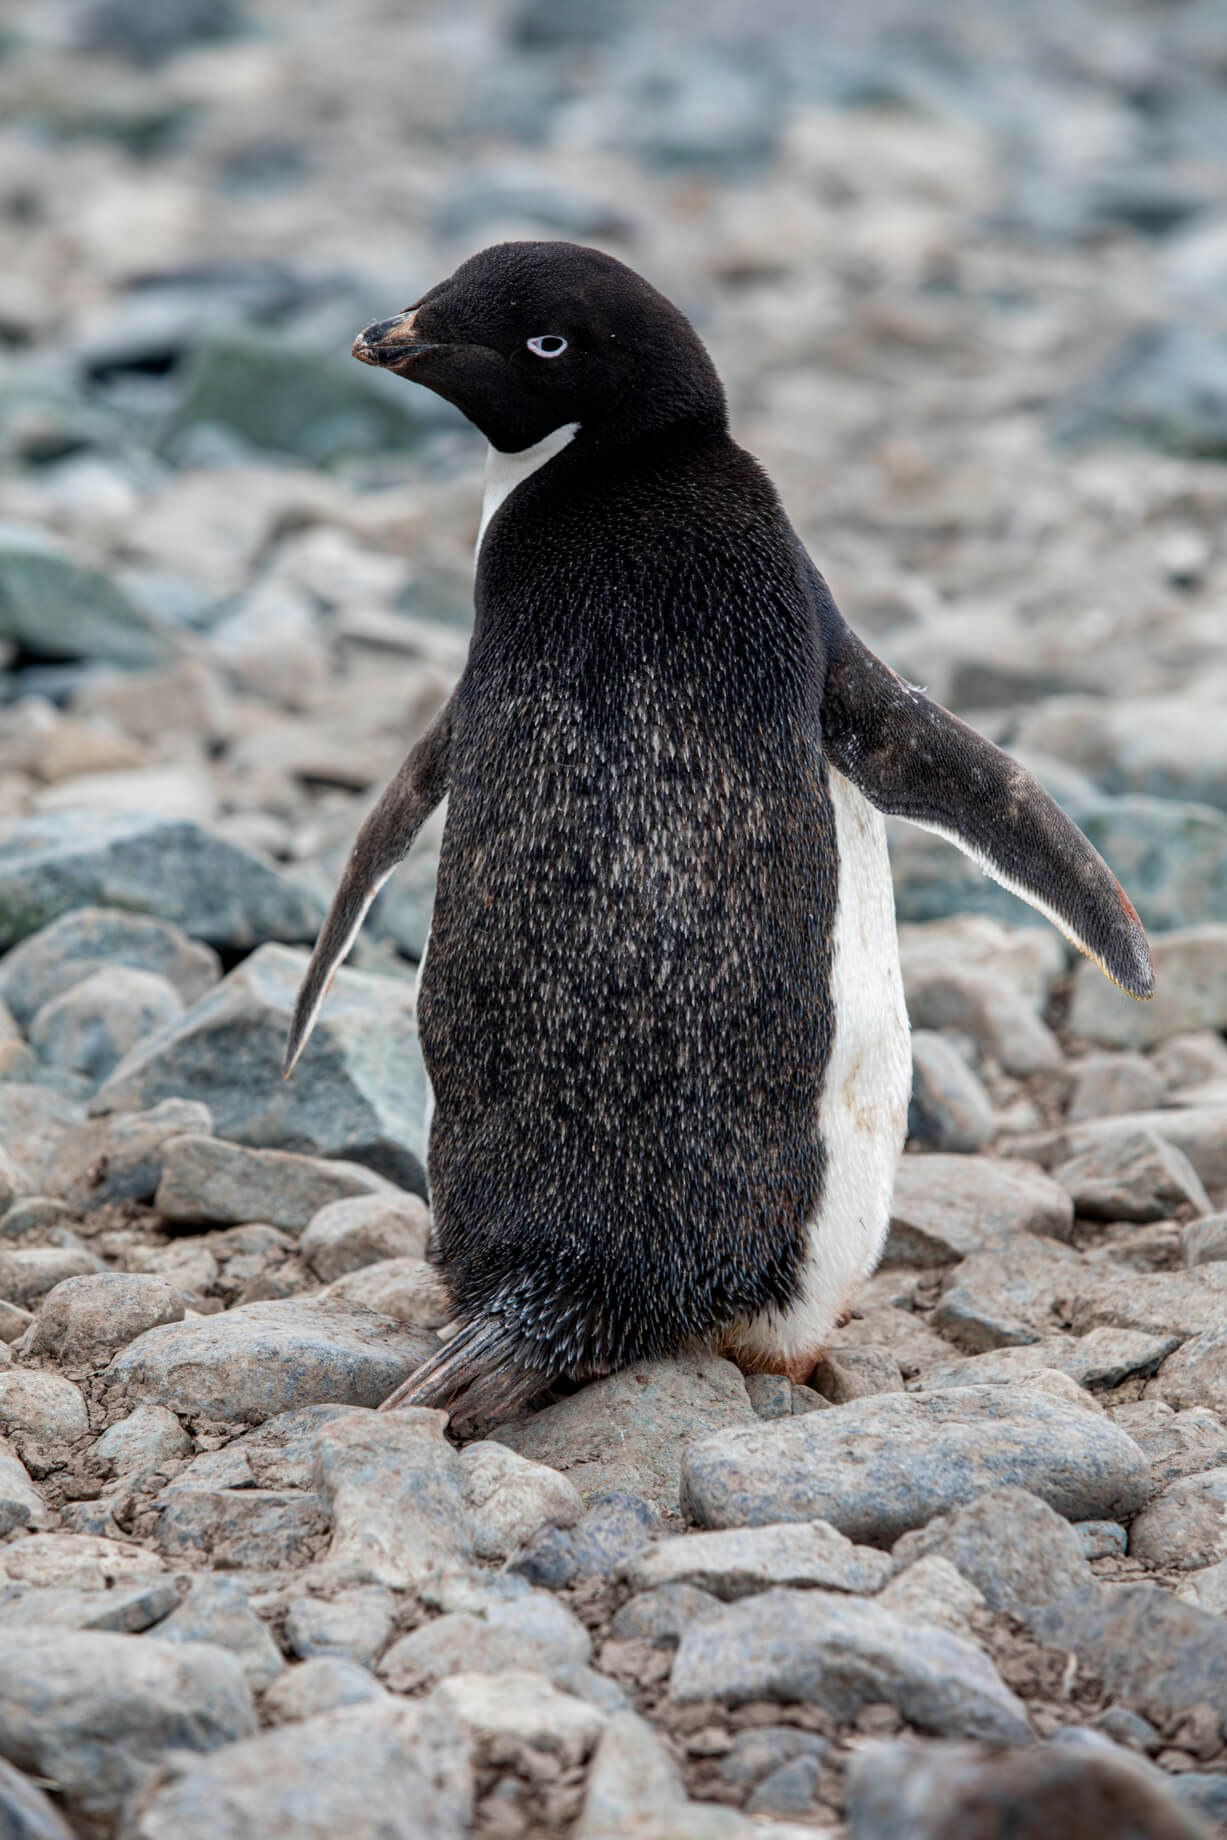 A small penguin stands on rocks, looking over its shoulder at the camera.